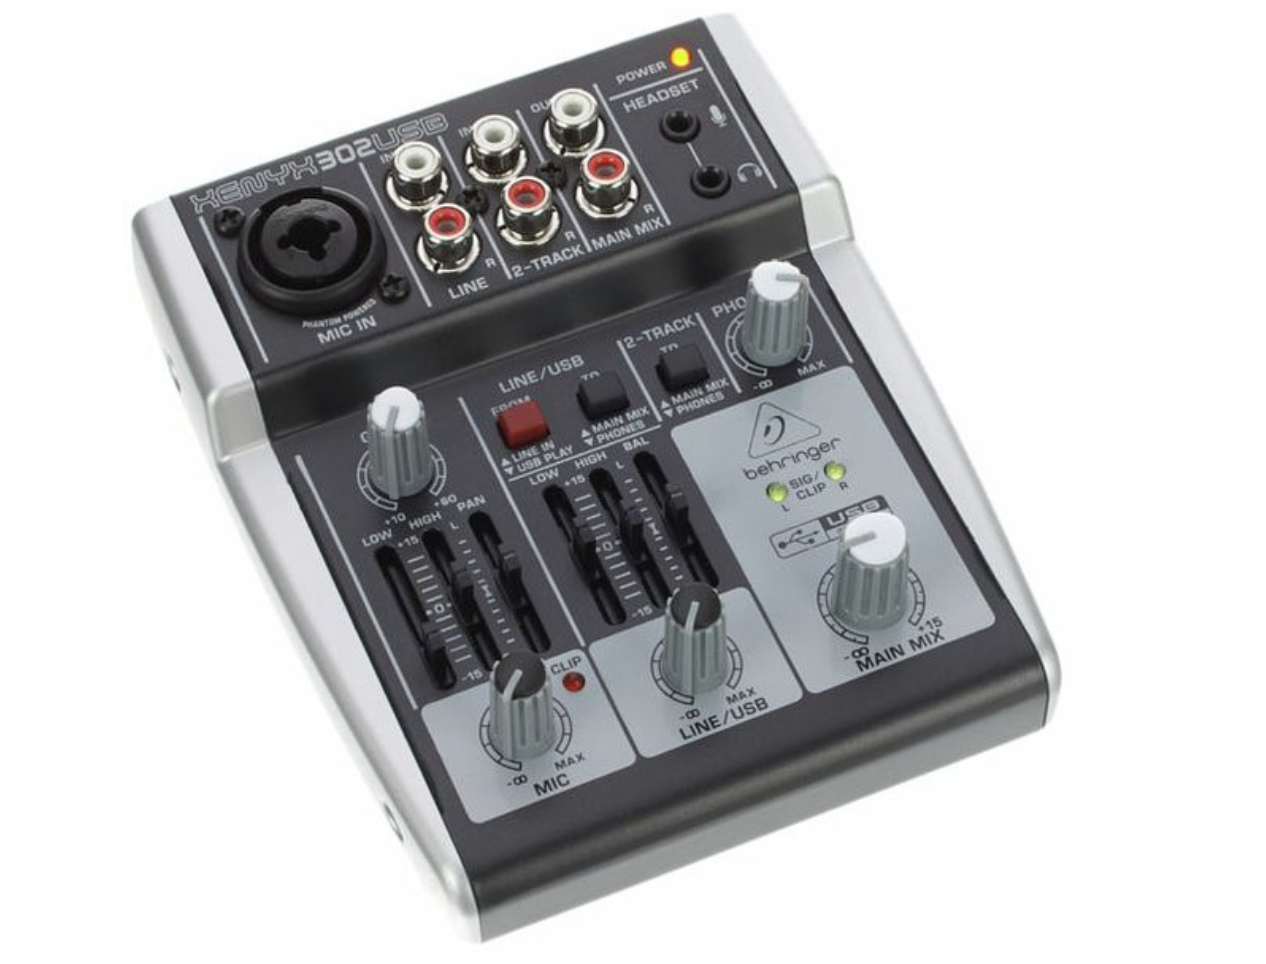 Behringer Xenyx 302USB Mixer and USB Interface